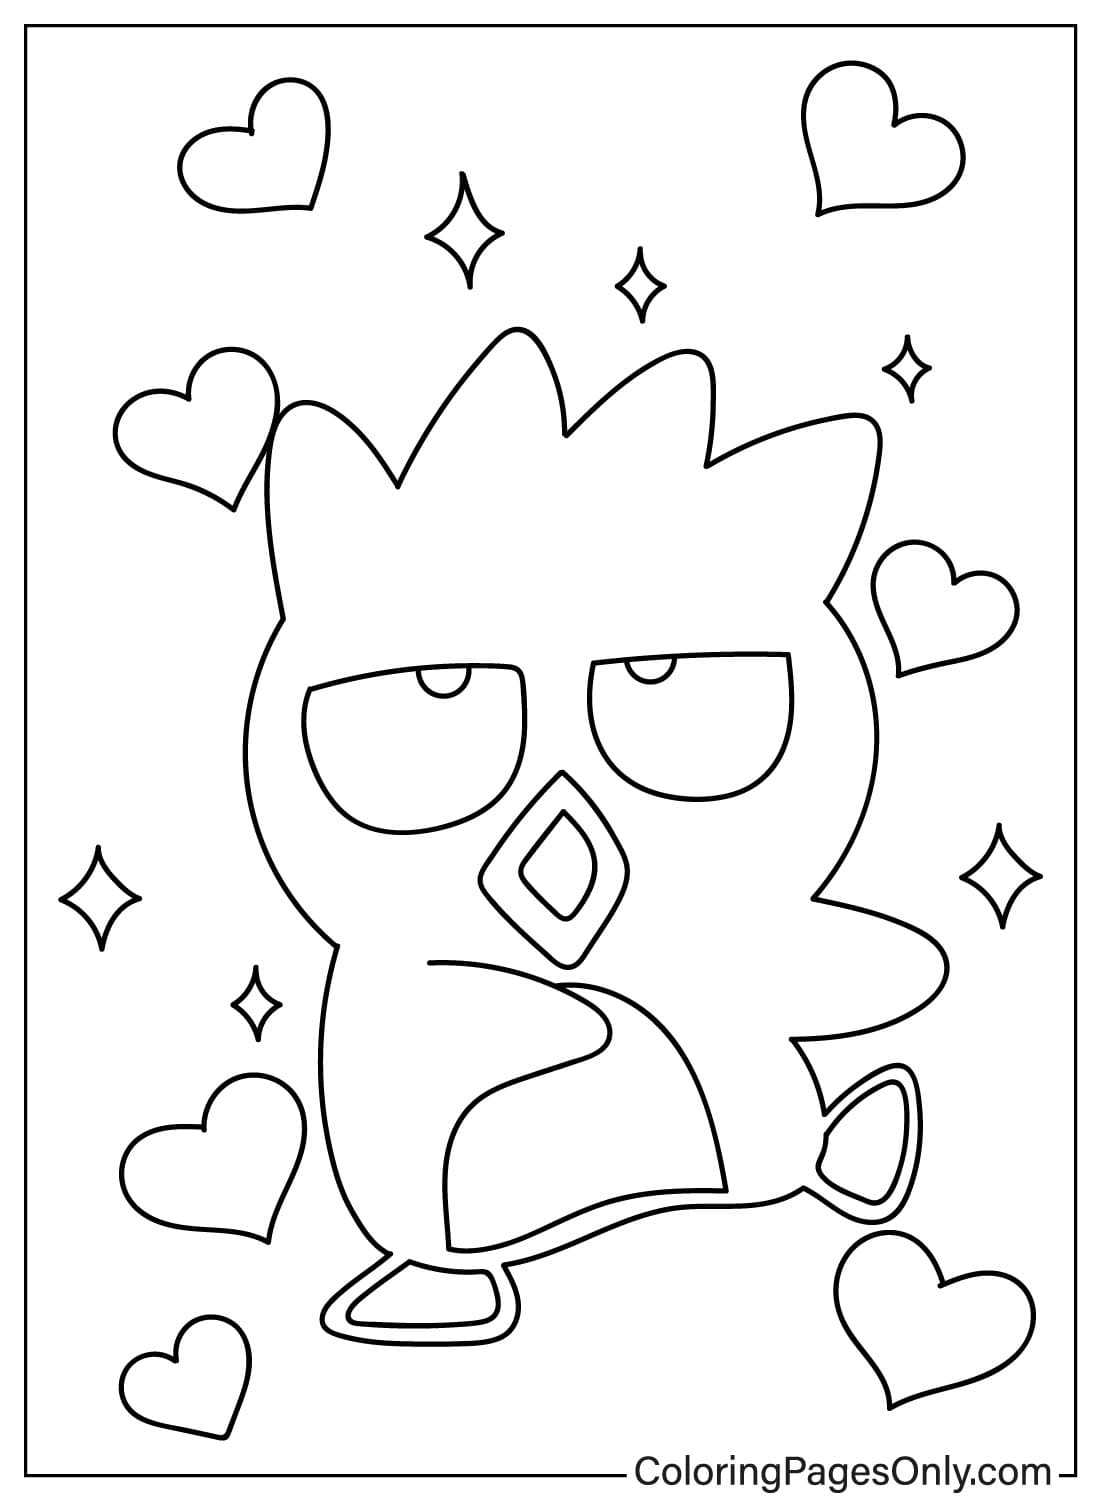 Images Badtz-Maru Coloring Page from Badtz-Maru